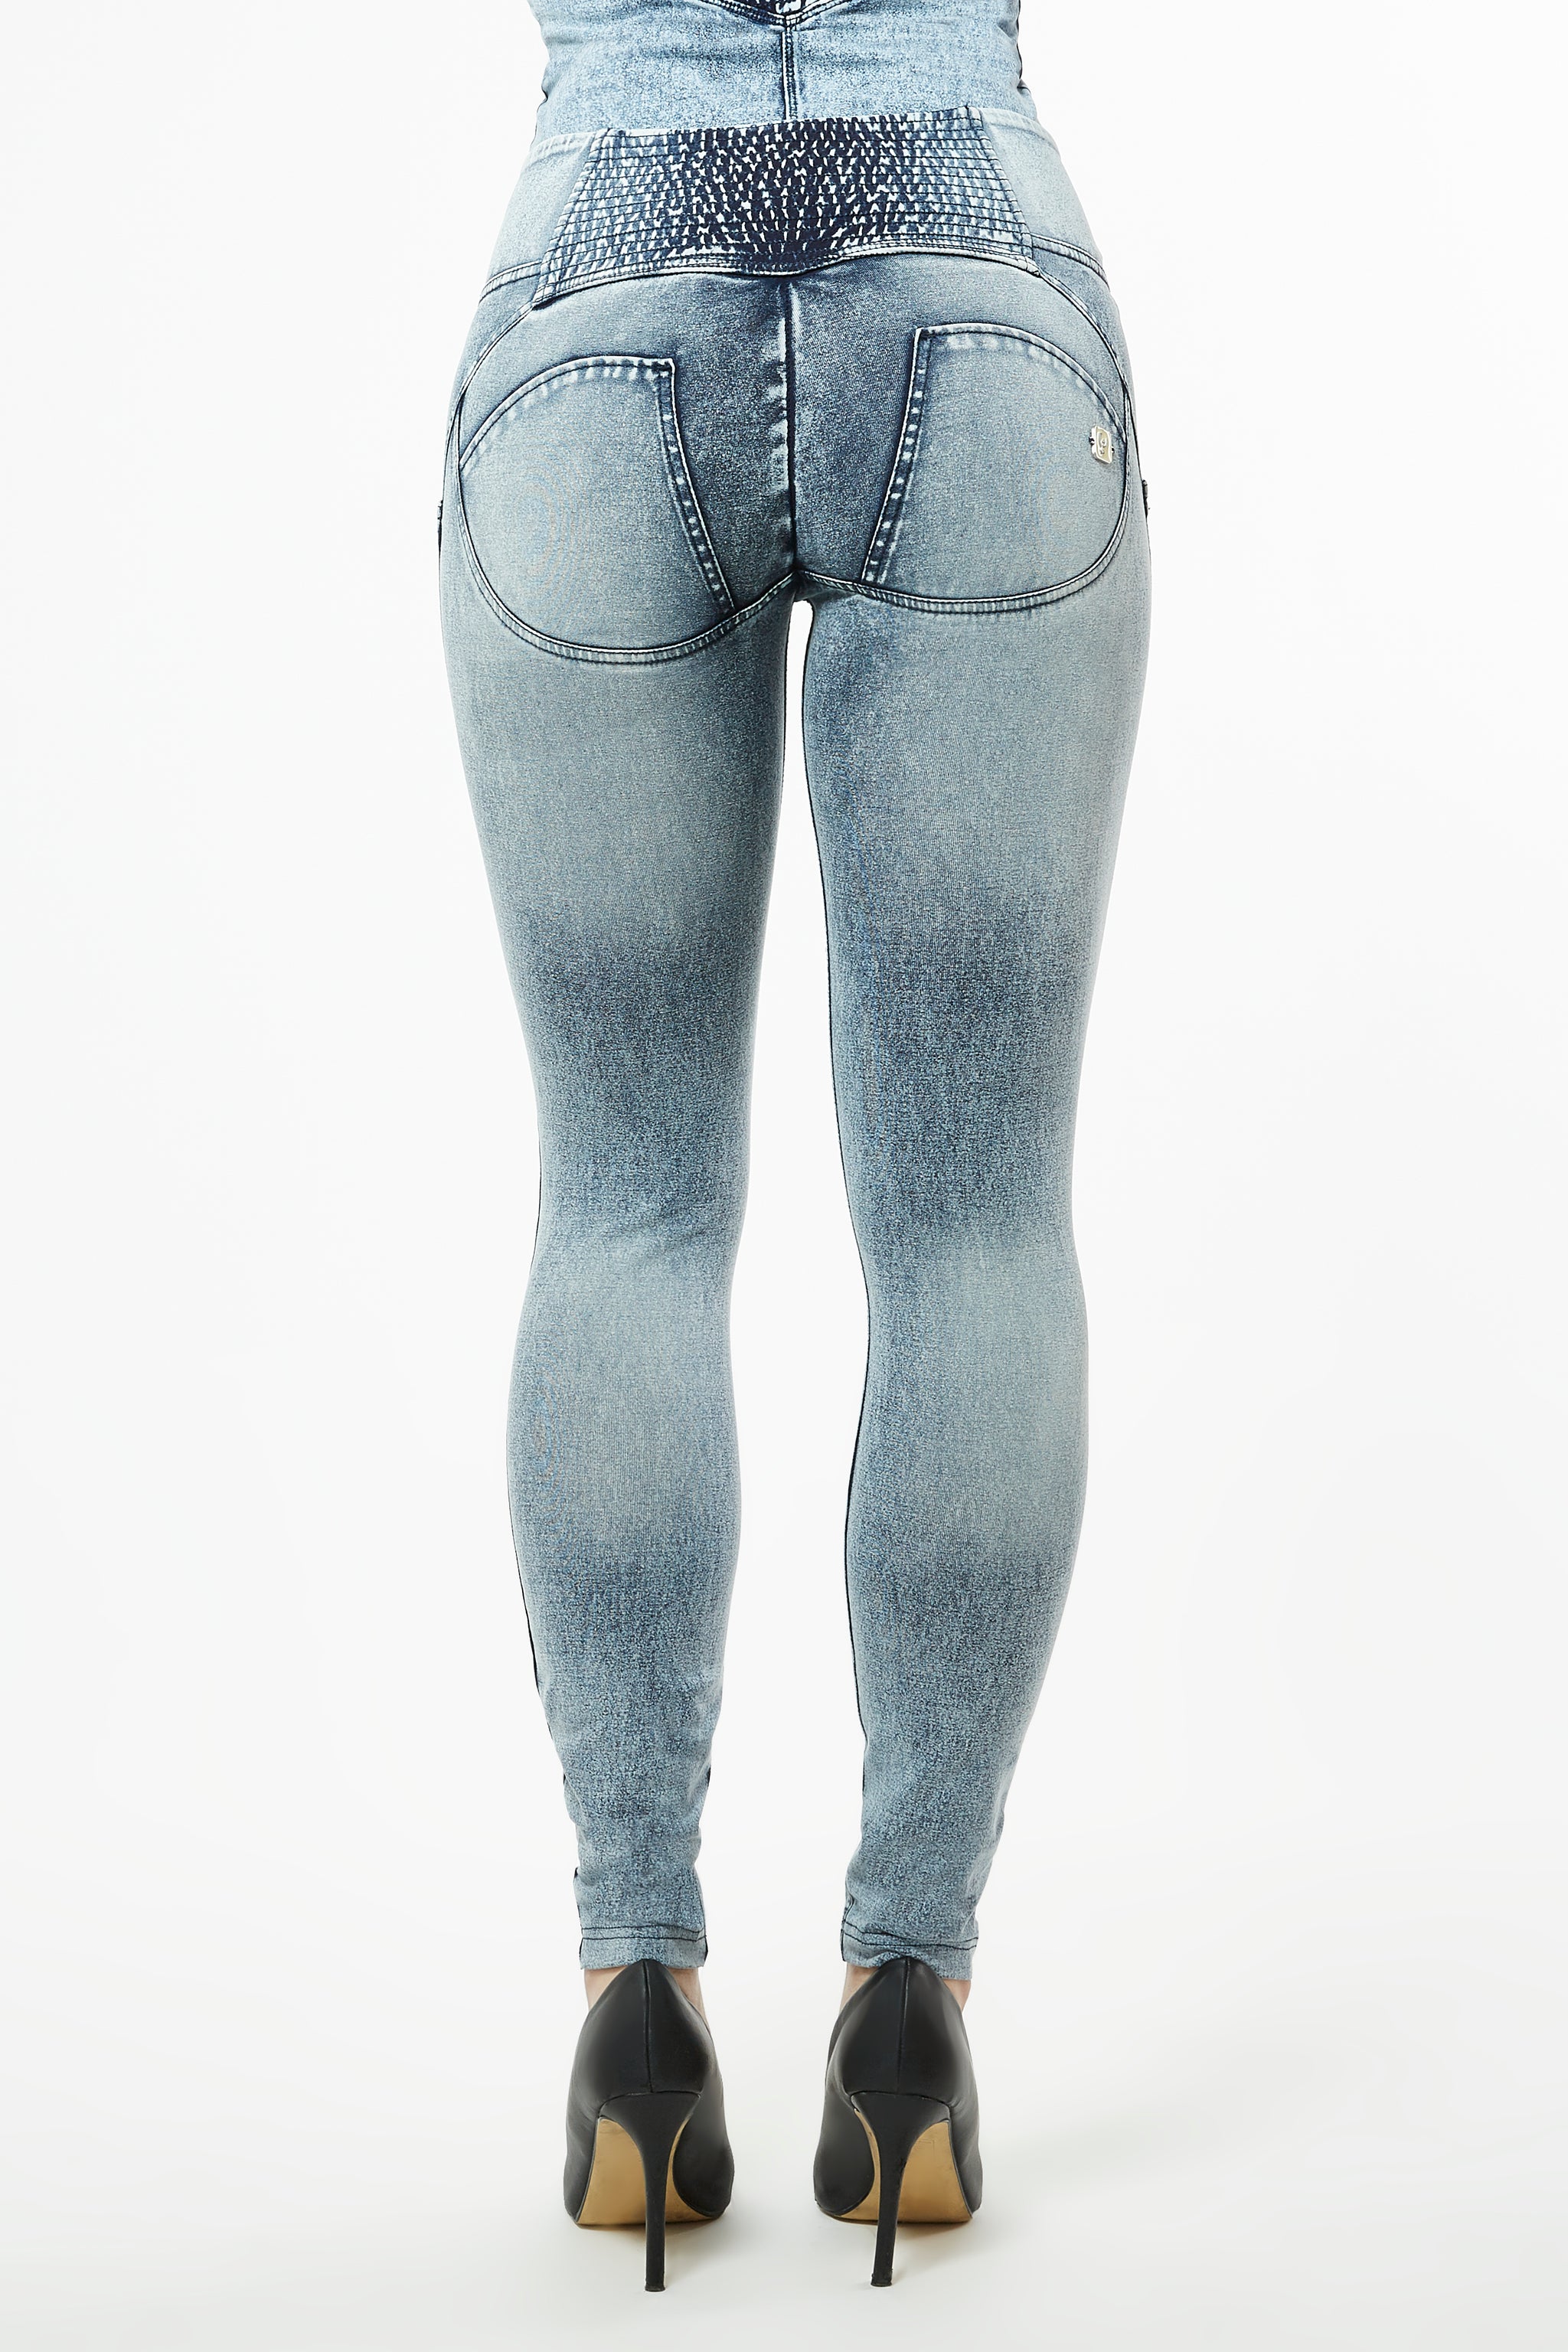 Cotton:On mid rise jeggings in dark rinse